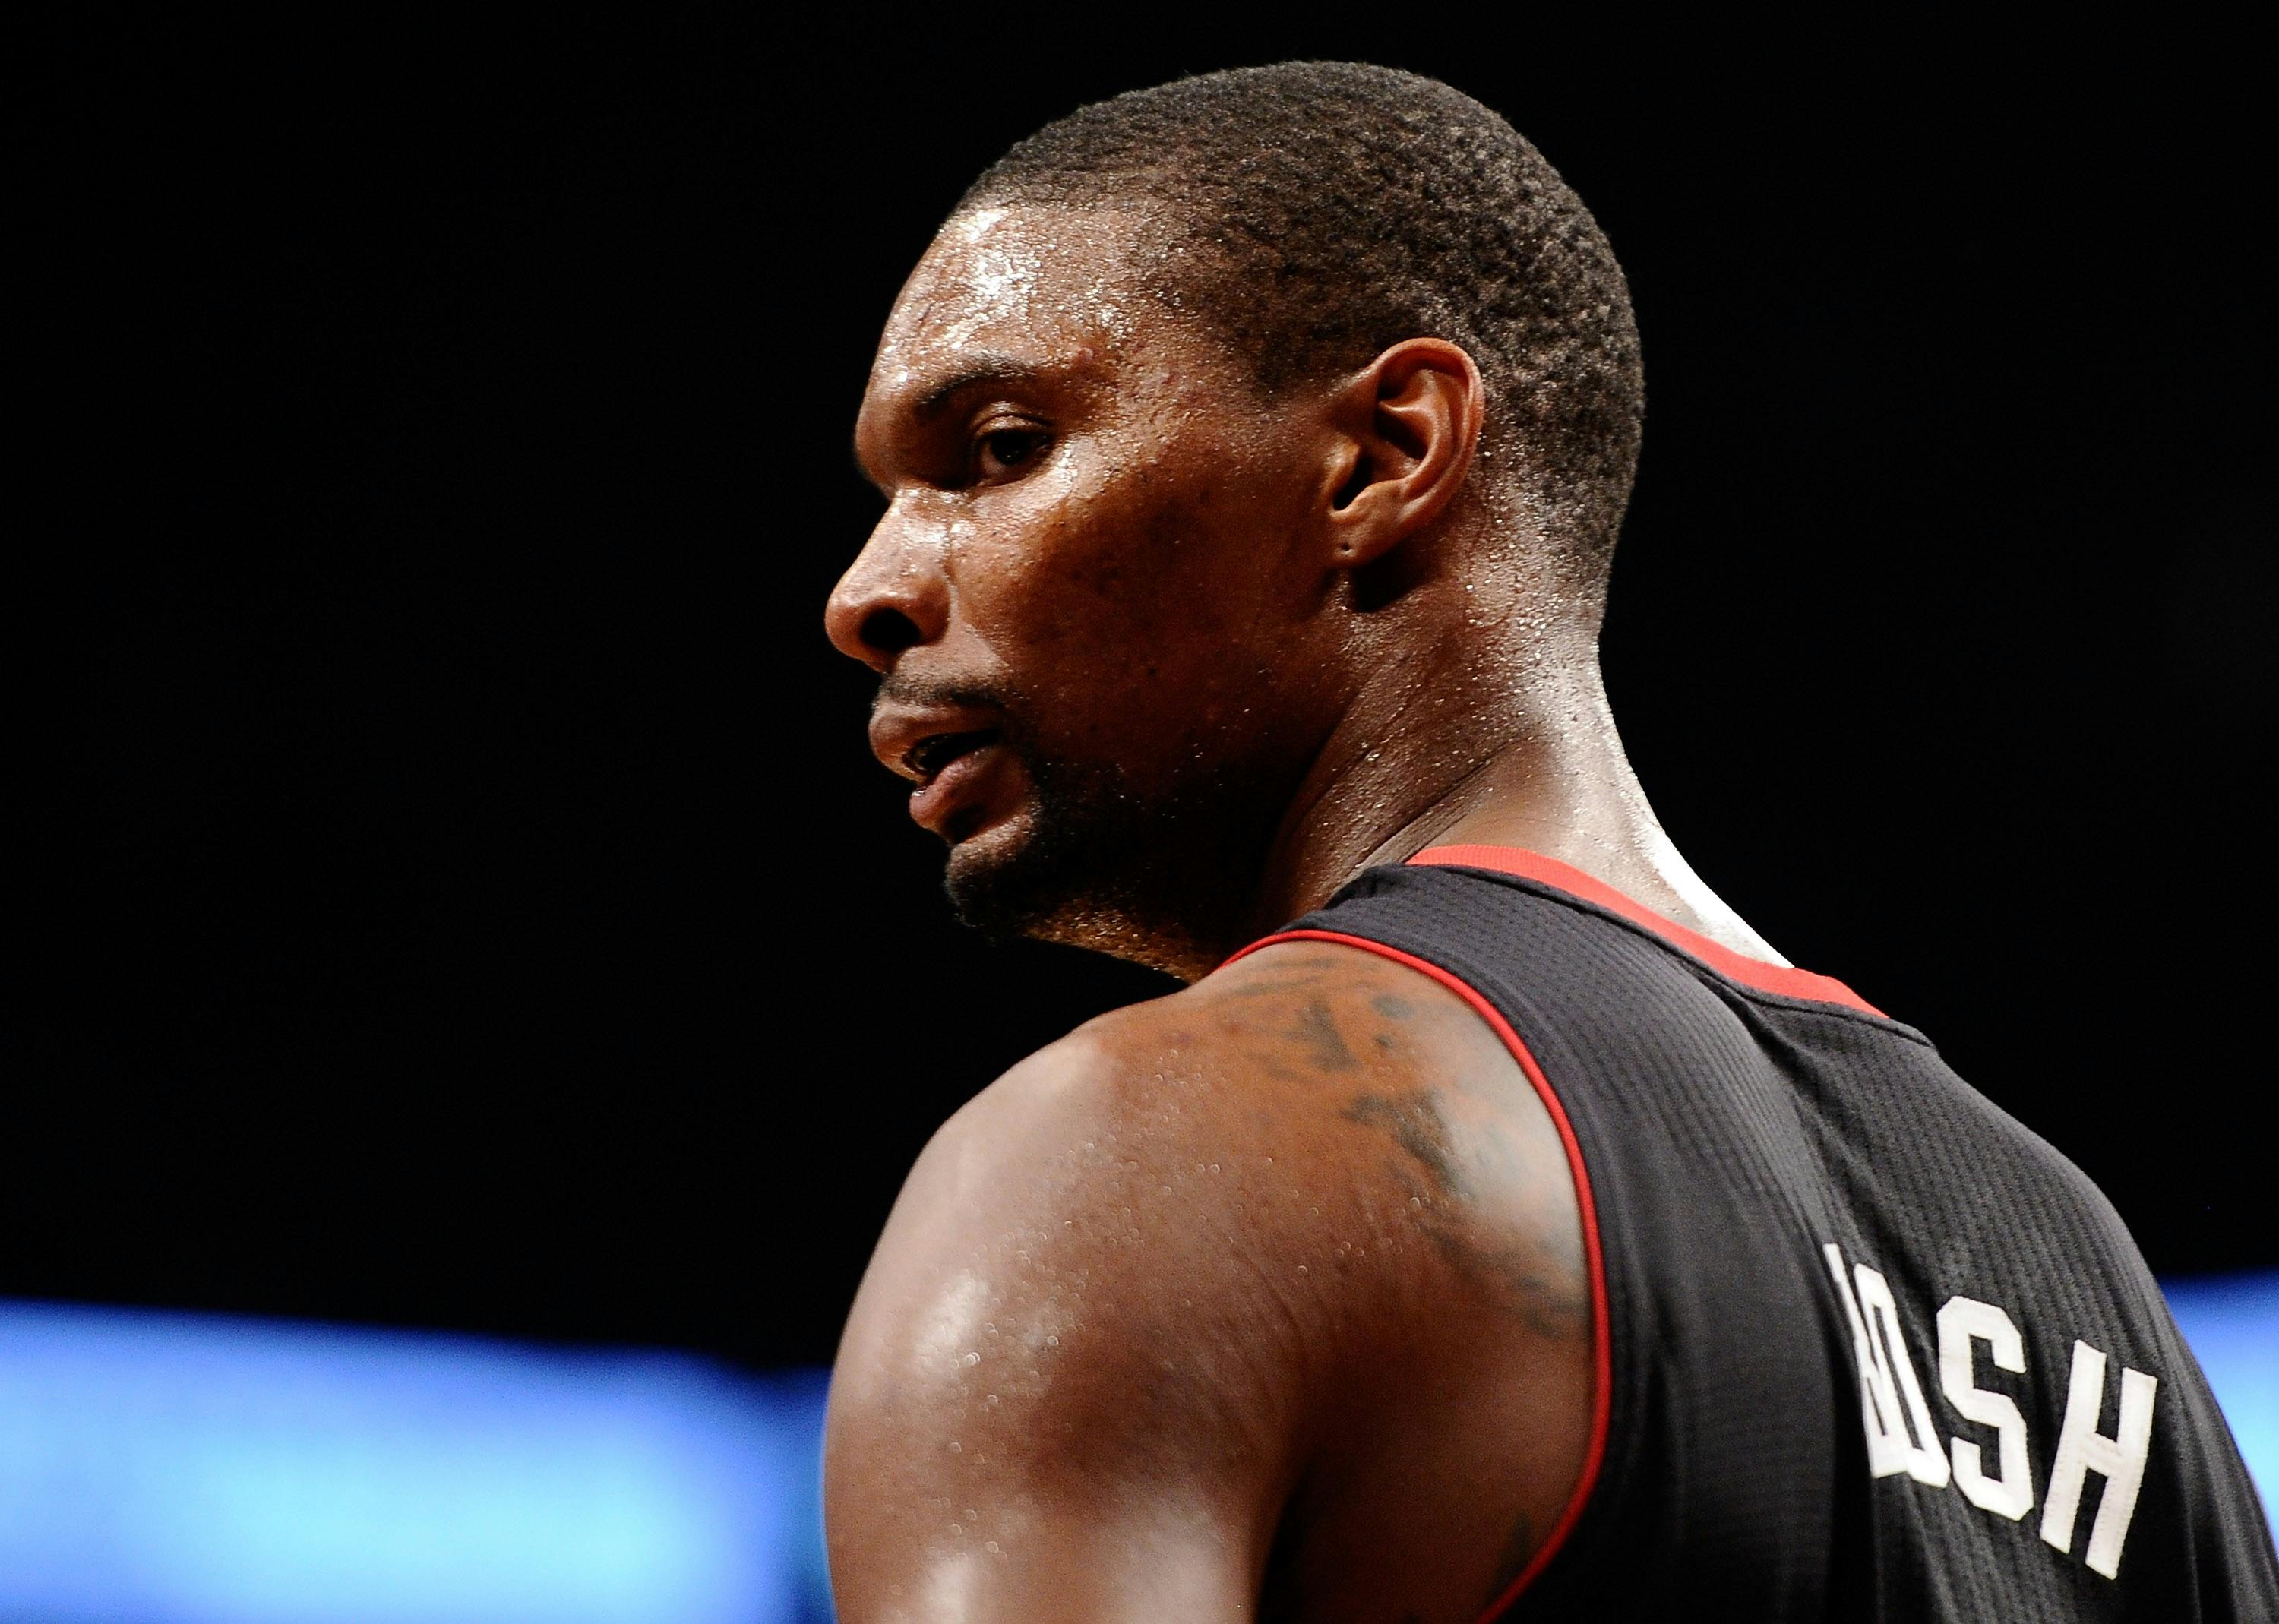 Chris Bosh: An Allegory to Life